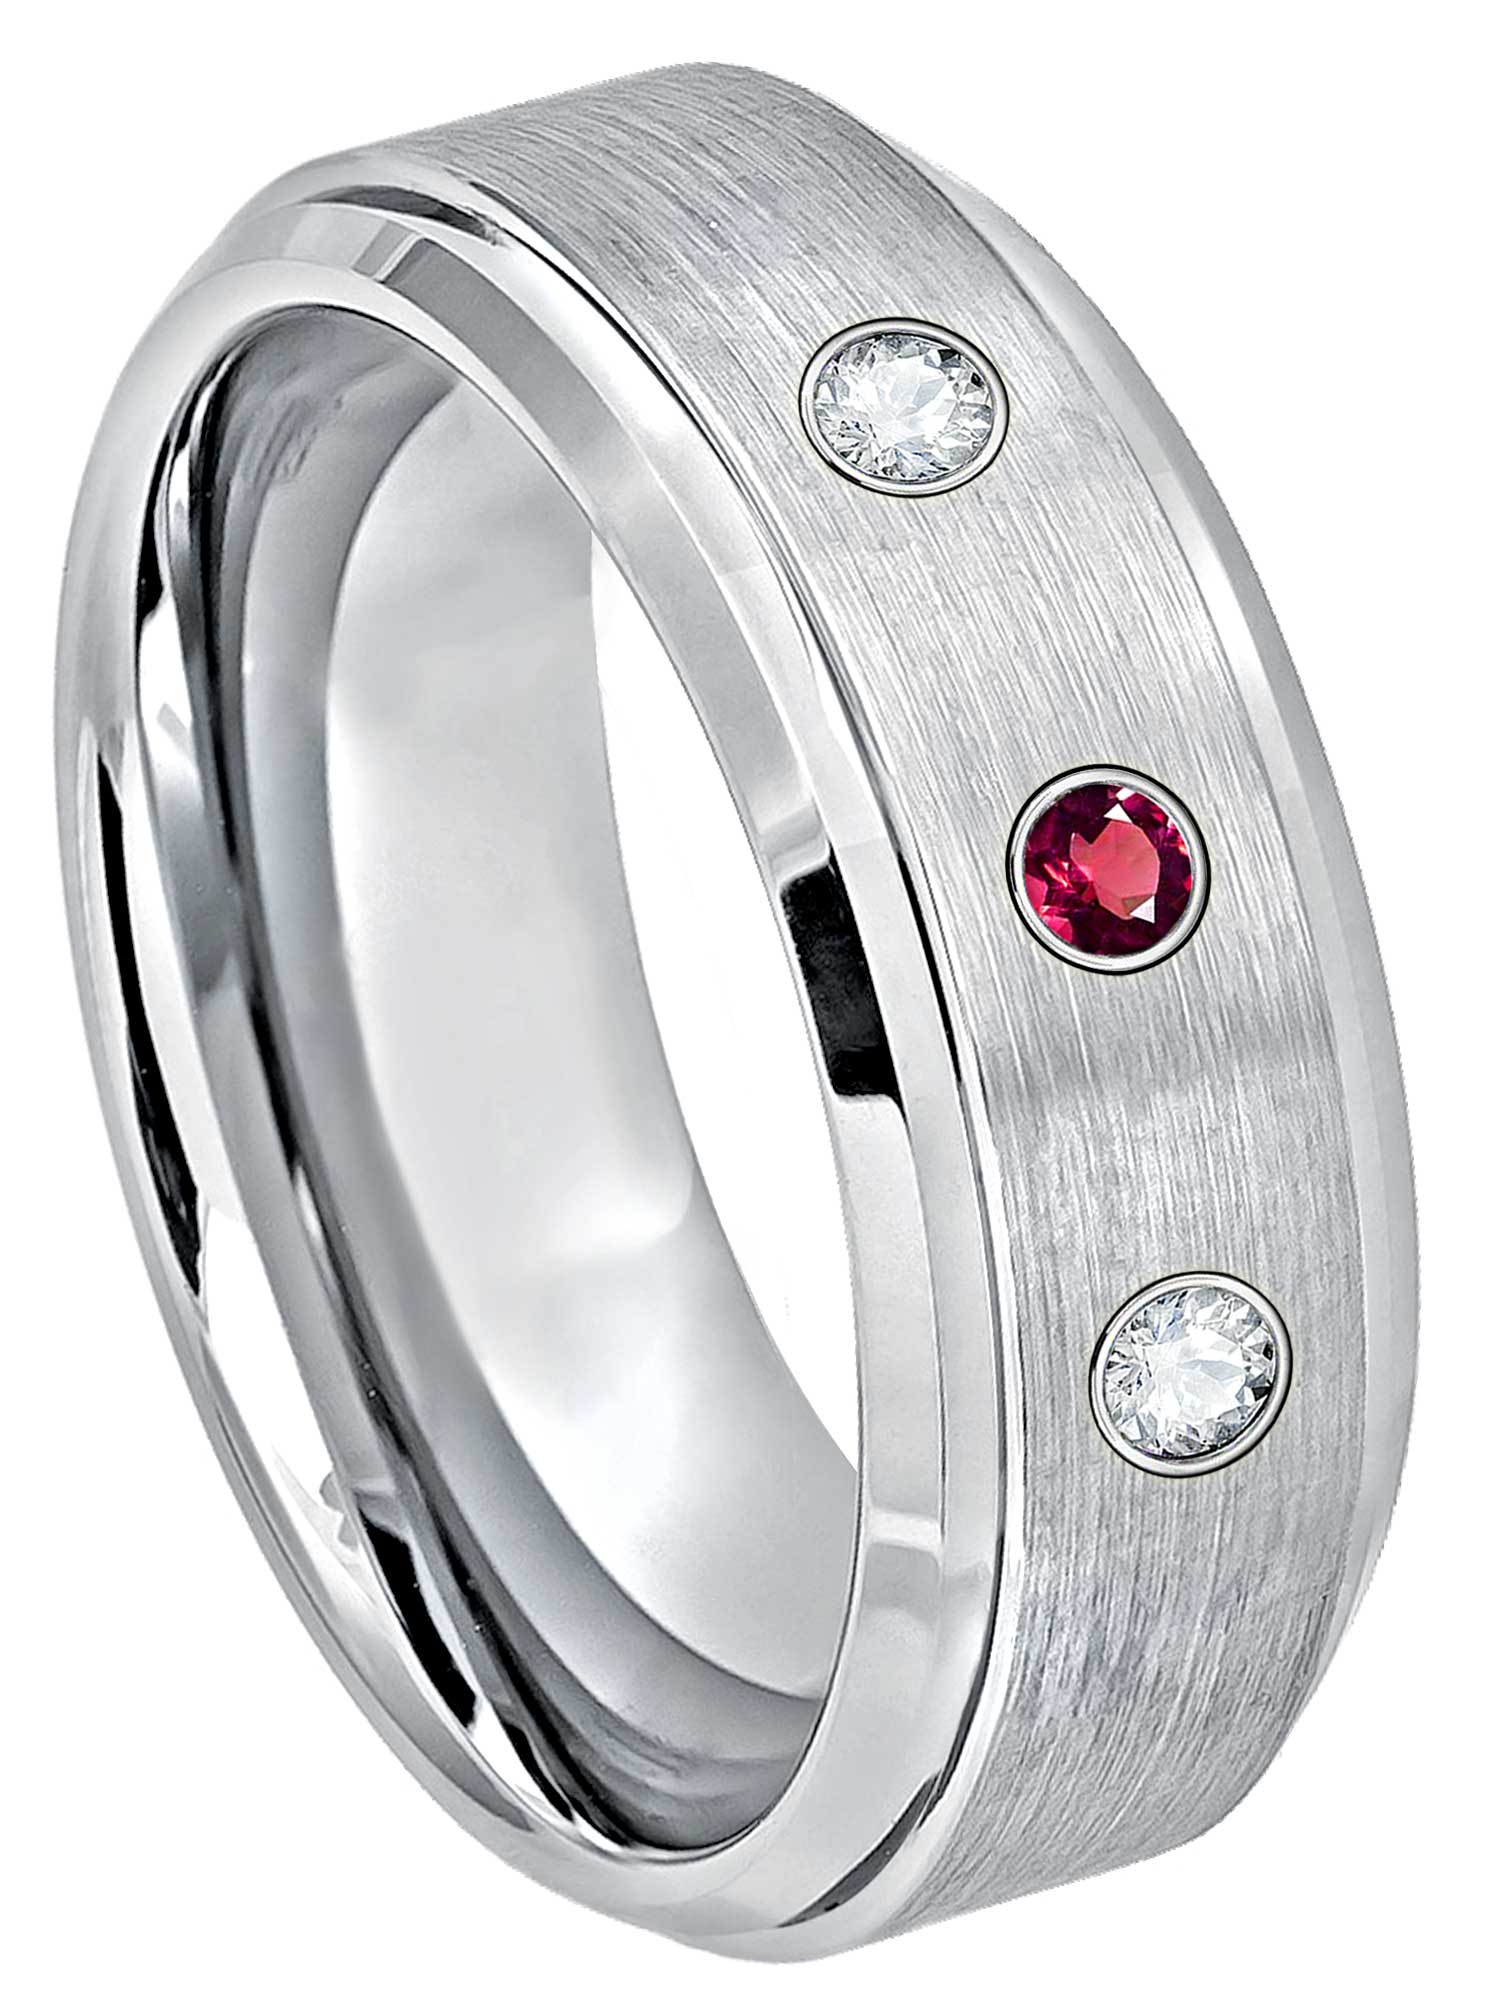 JEWELRY AVALANCHE 8mm Cobalt Ring Mens Wedding Band - 0.21ctw Ruby & Diamond 3-Stone Ring - July Birthstone Ring